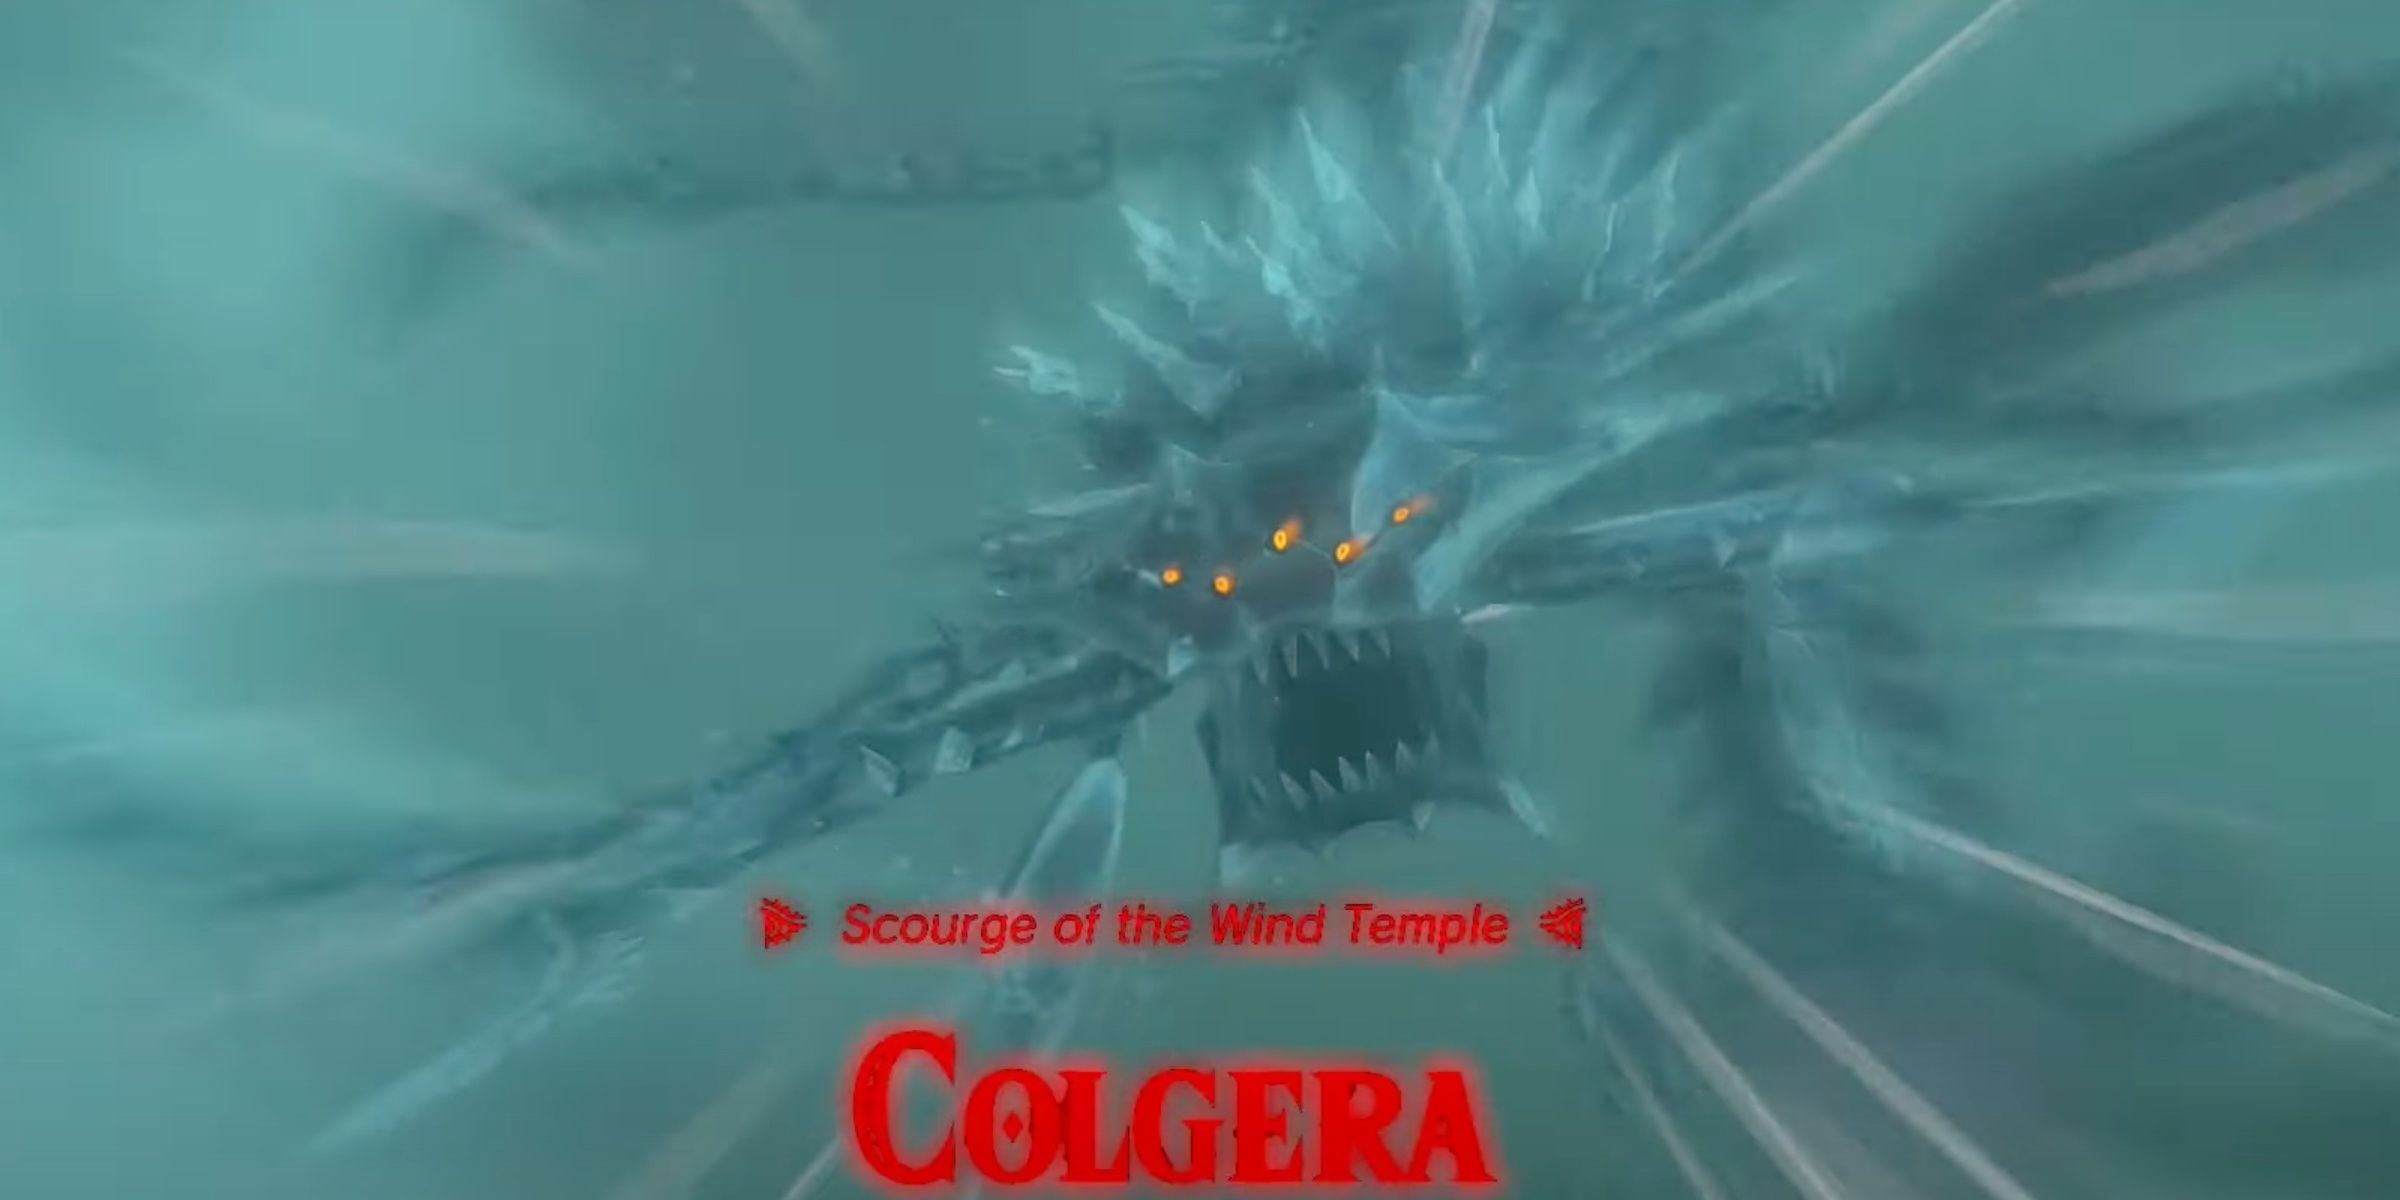 Colgera roars as it prepares to attack Link in the air in The Legend Of Zelda: Tears Of The Kingdom.